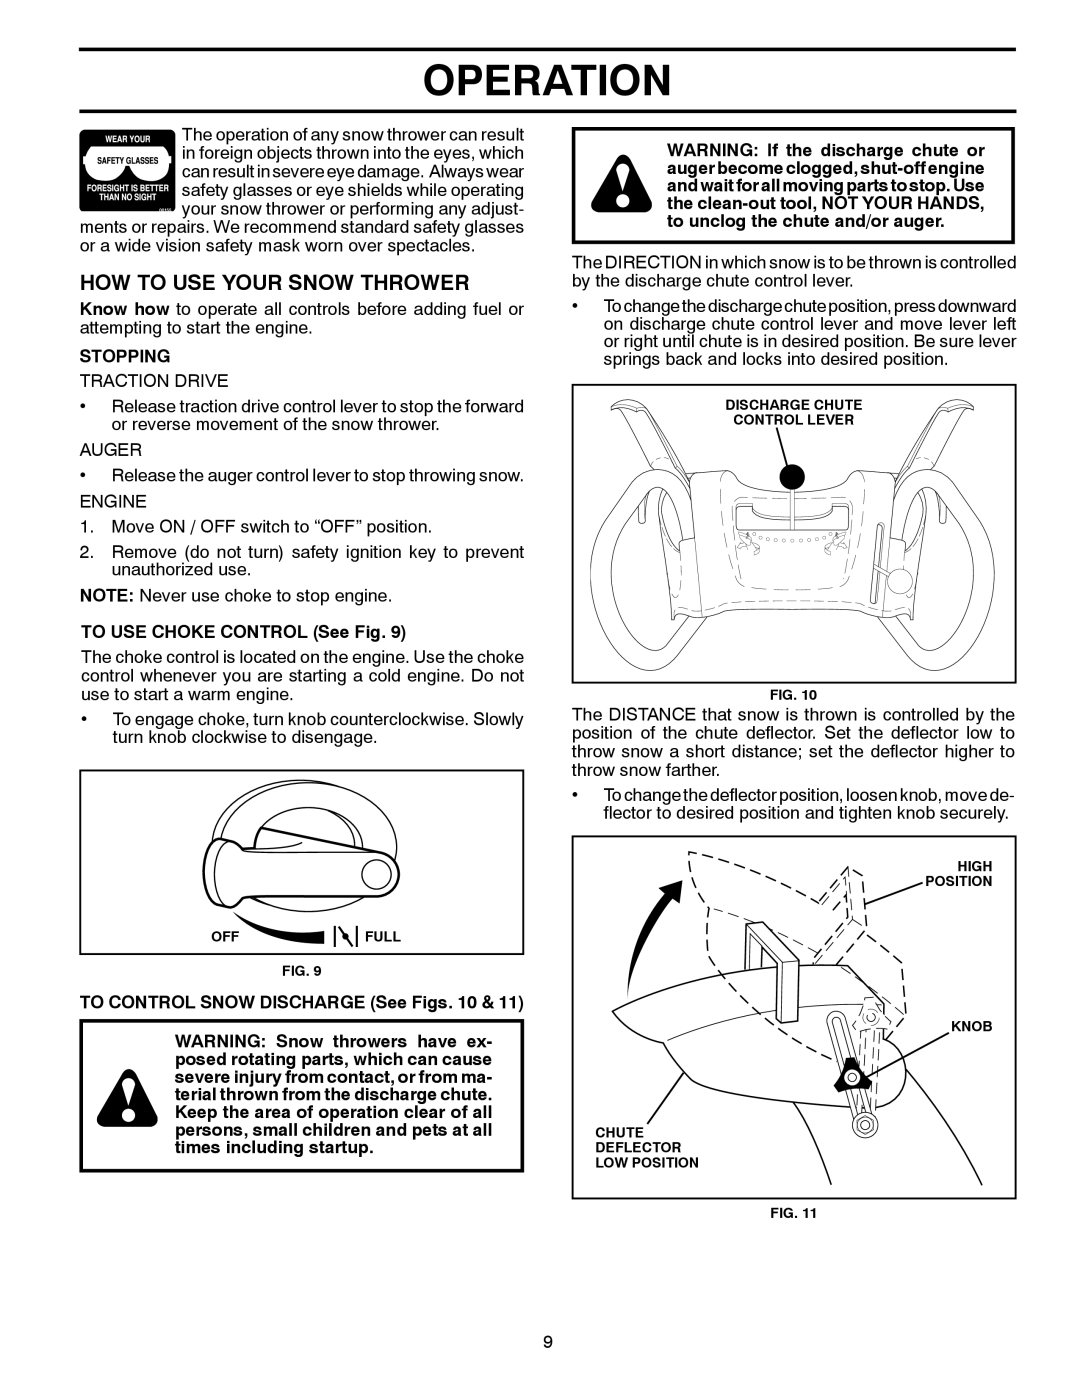 Poulan 96192003301, 430352 owner manual How To Use Your Snow Thrower, Operation, Stopping, TO USE CHOKE CONTROL See Fig 